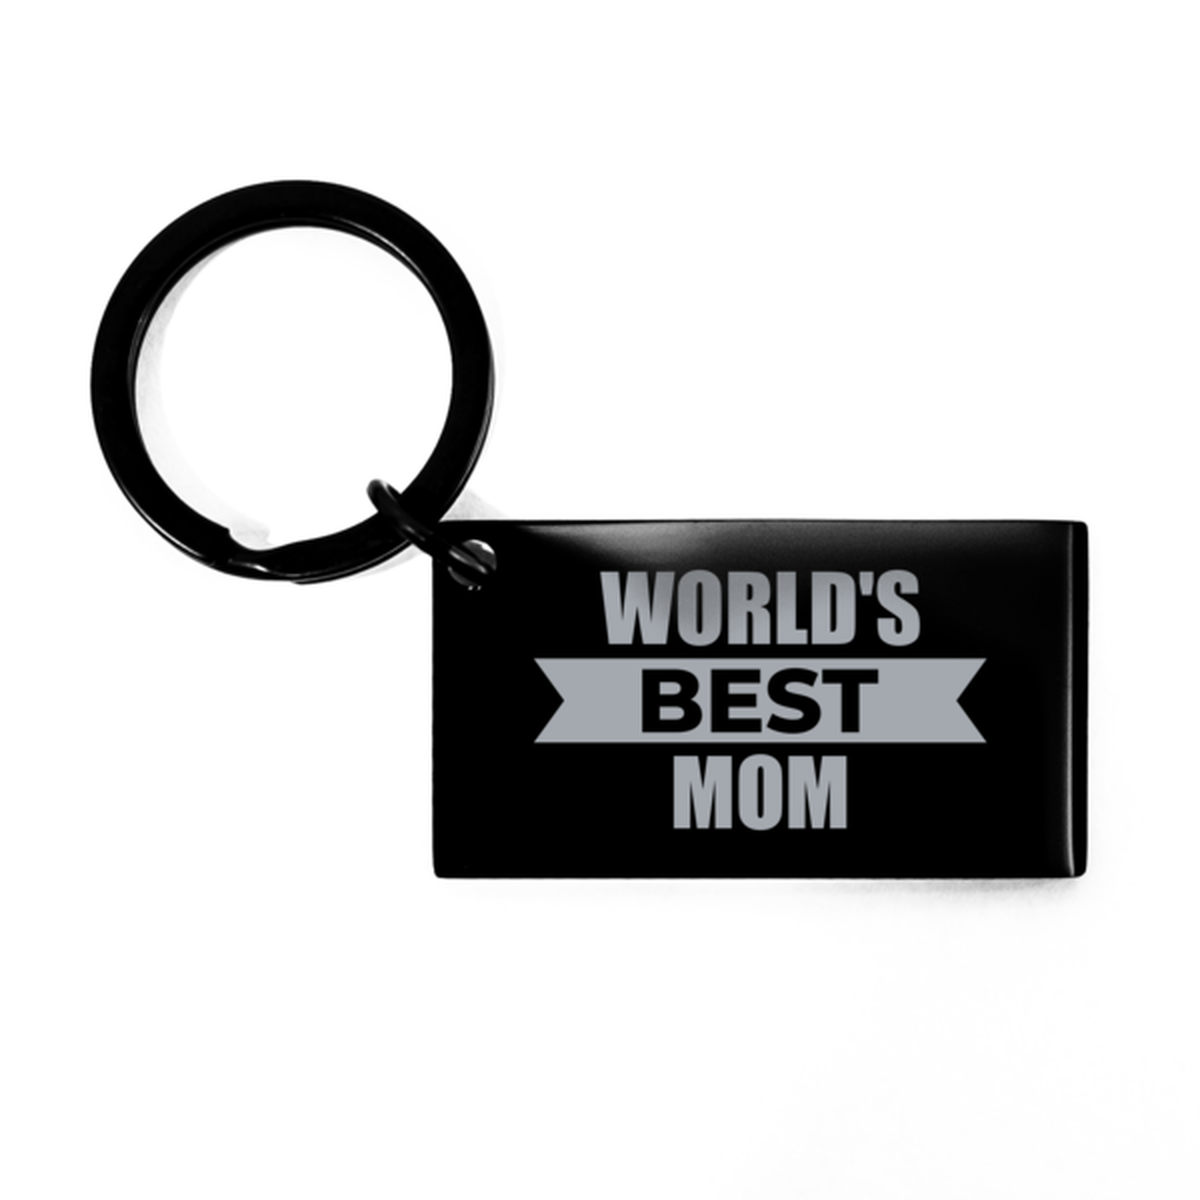 Worlds Best Mom Gifts, Funny Black Engraved Keychain For Mom, Birthday Presents For Women